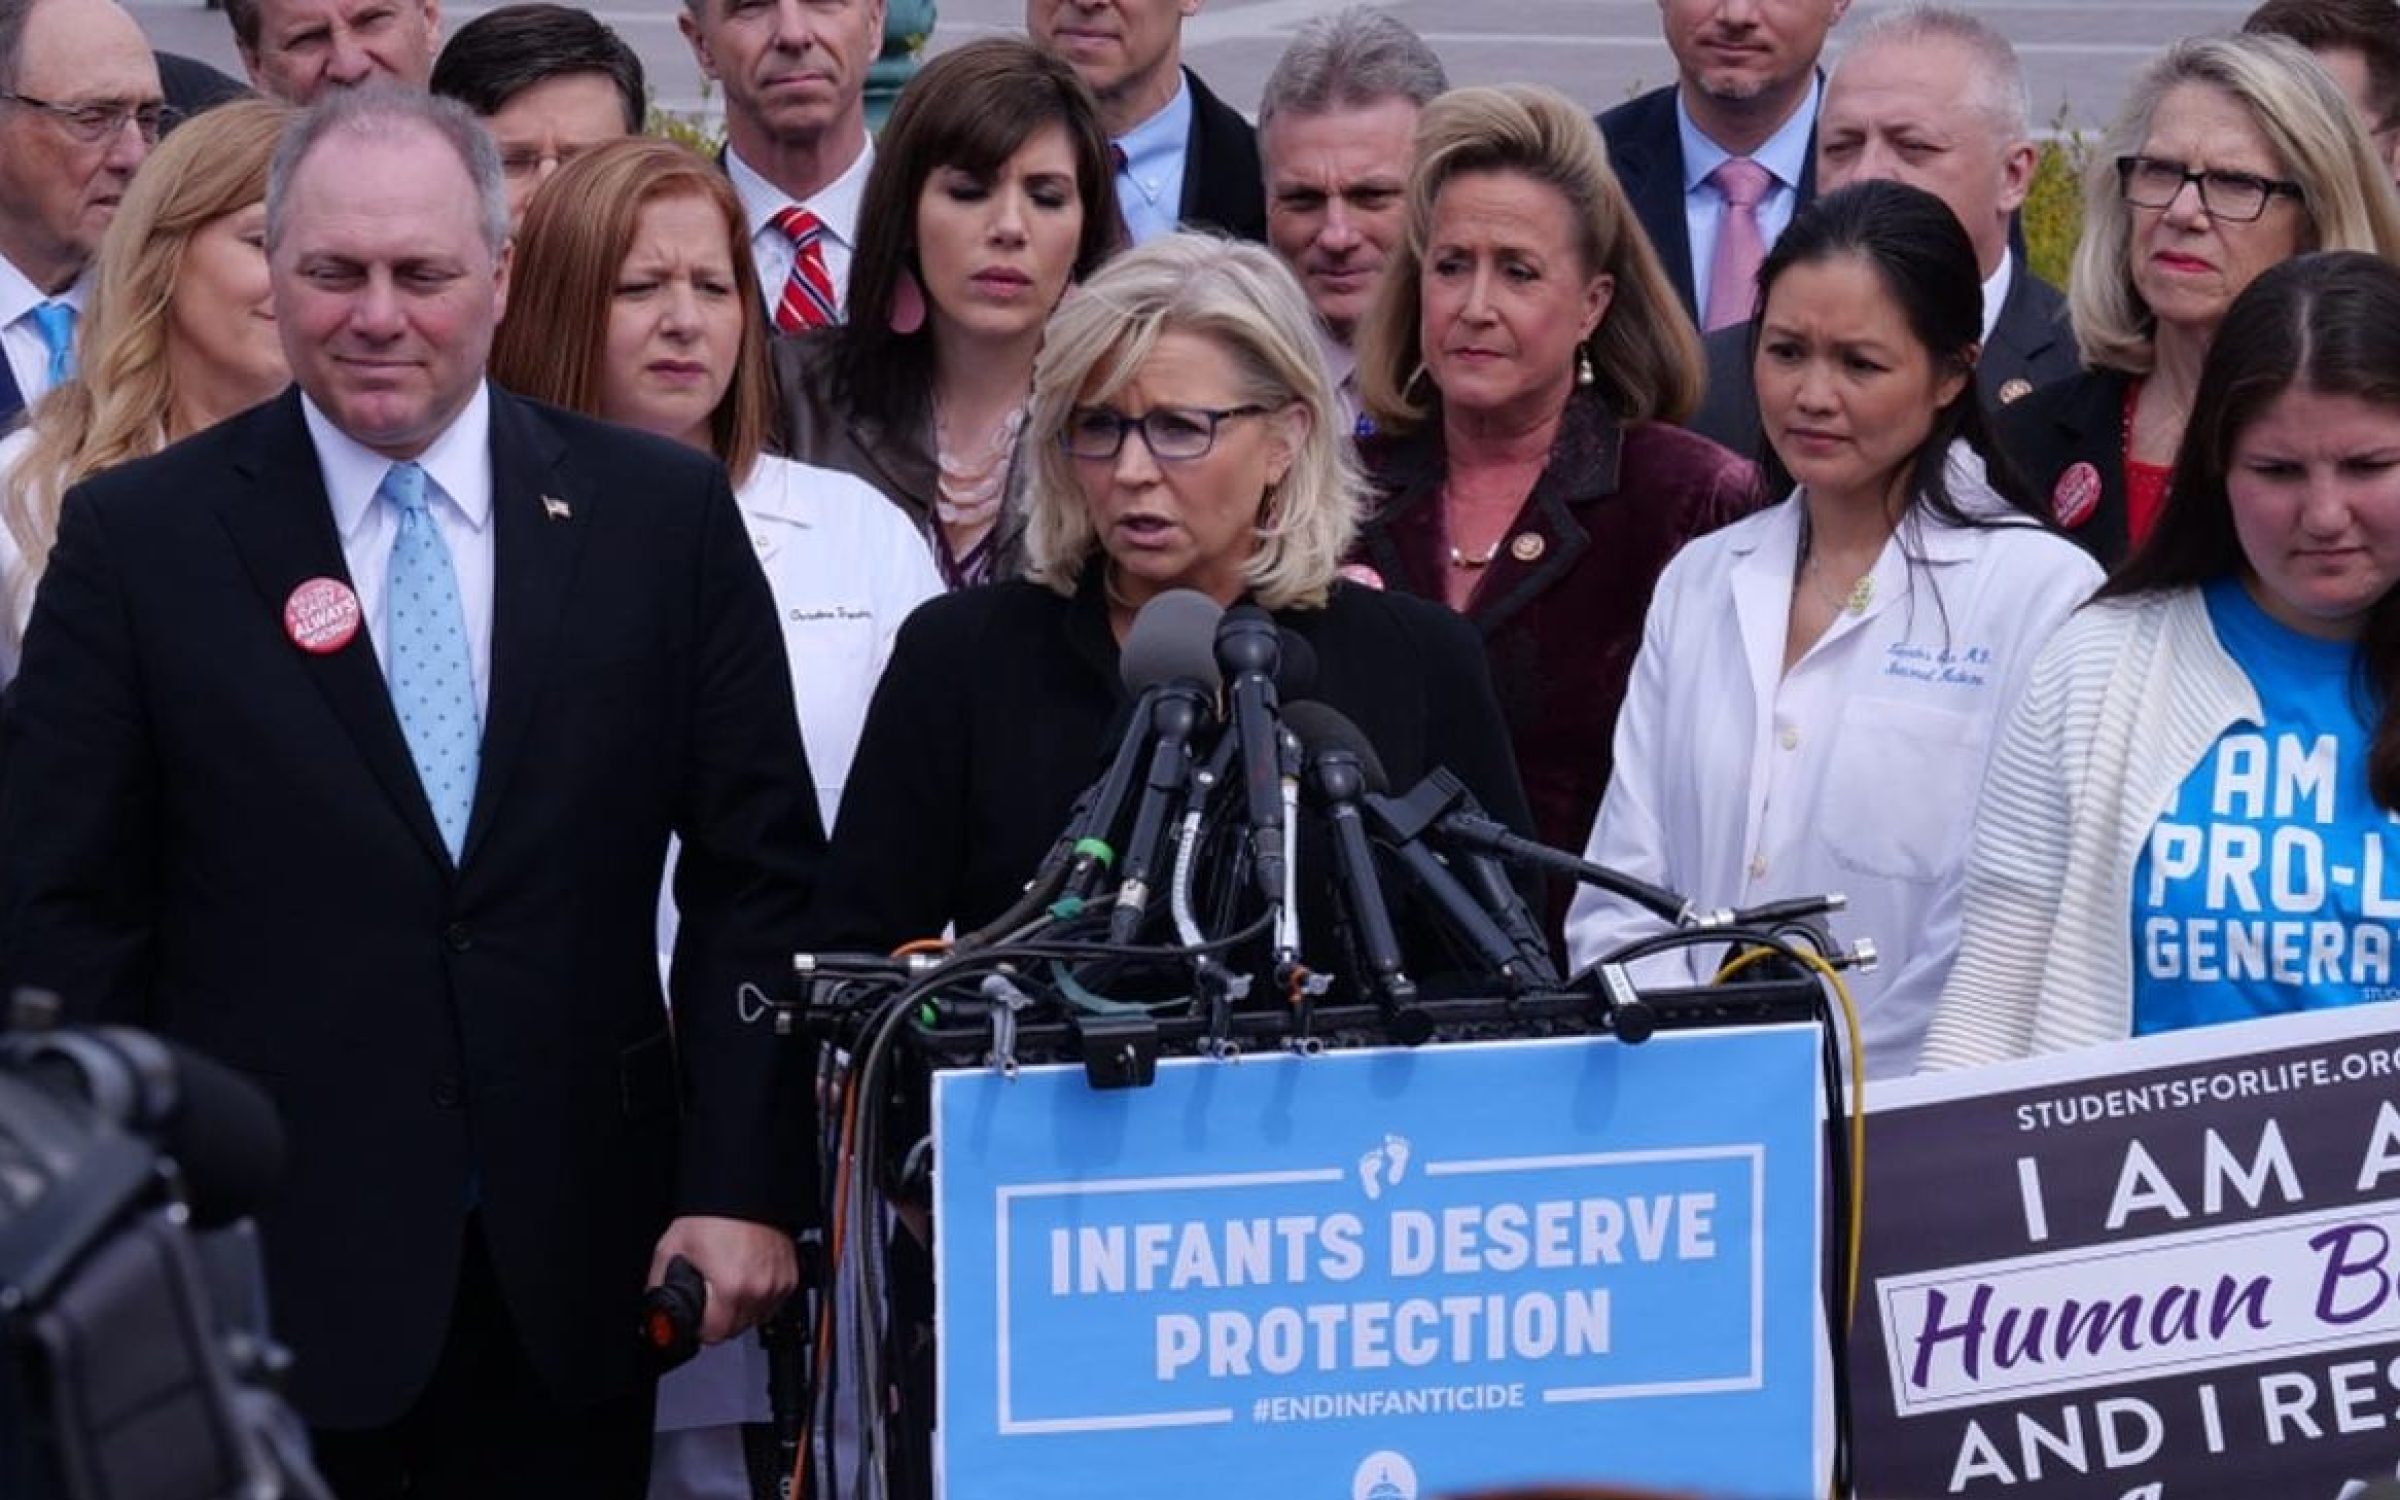 Photographed in Washington, D.C. (U.S.A), April 2, 2019. U.S. Congressman Liz Cheney speaking at an anti-abortion/anti-infanticide press conference outside the United States Capitol.